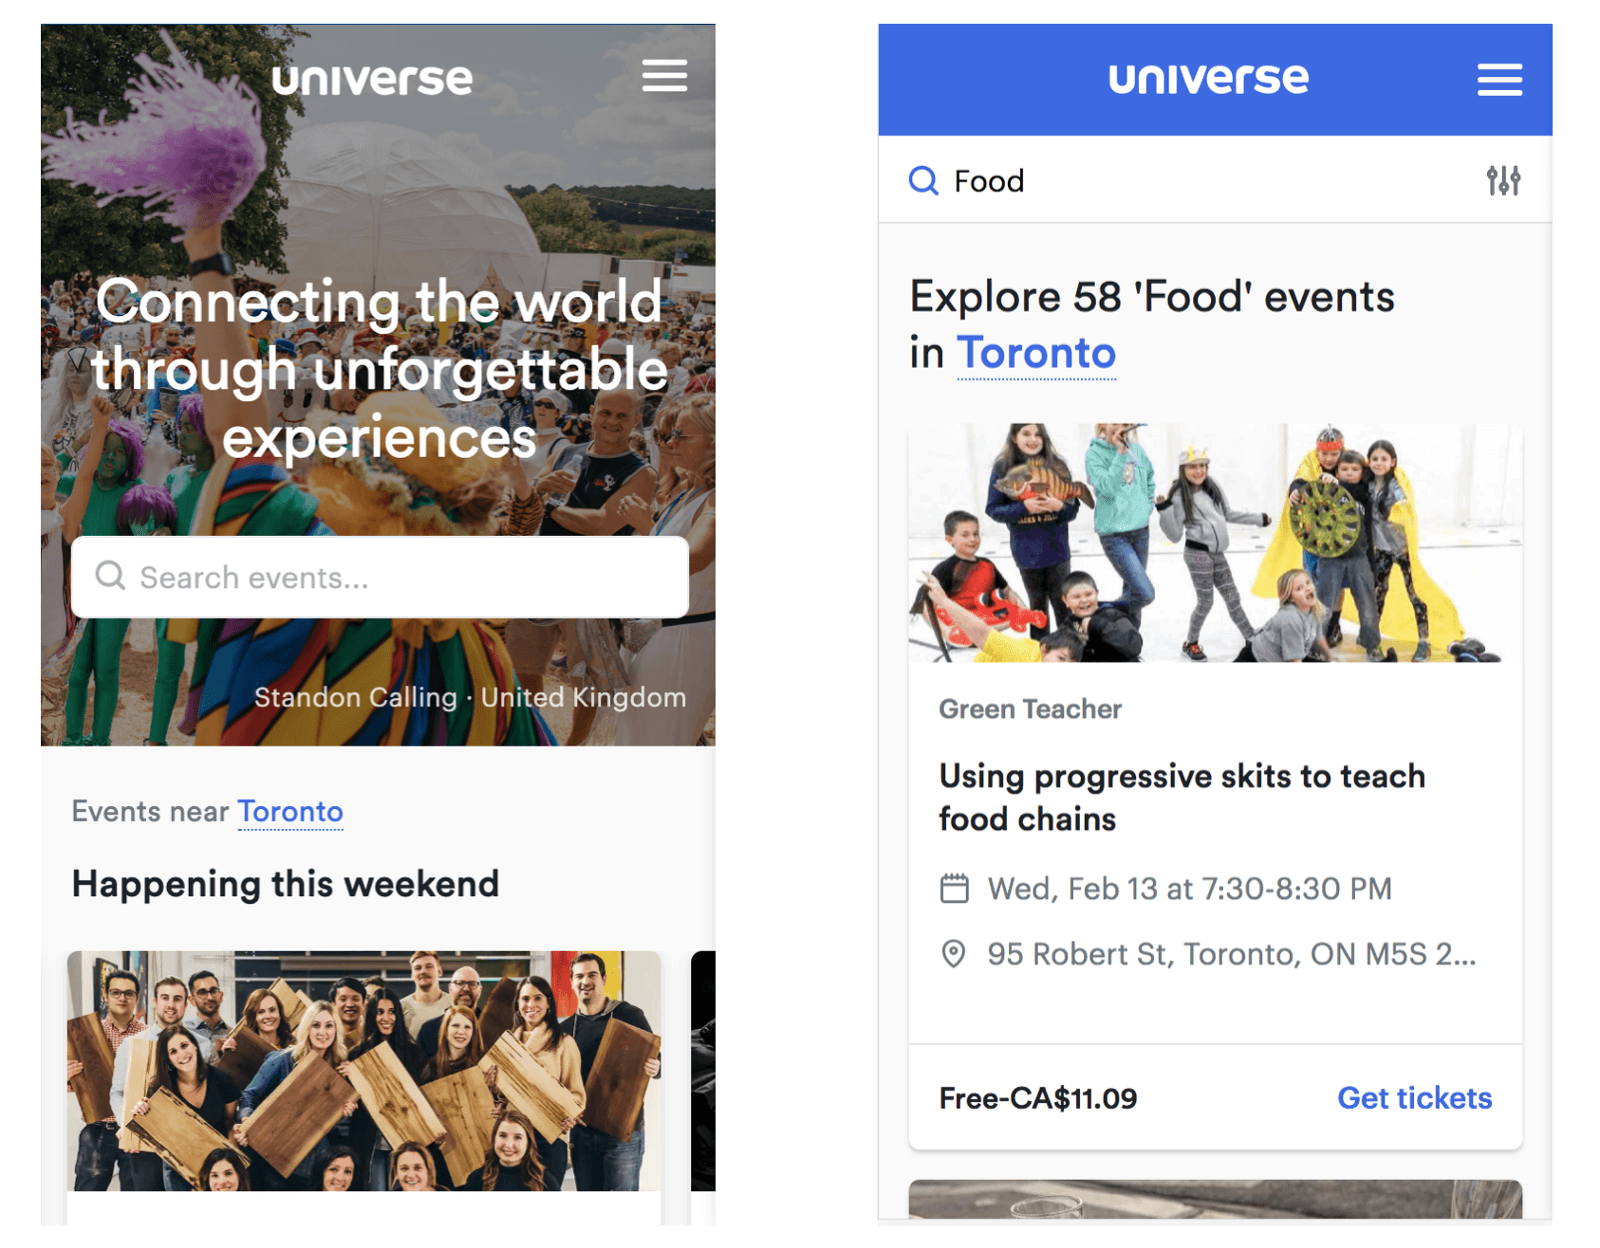 Universe homepage and explore